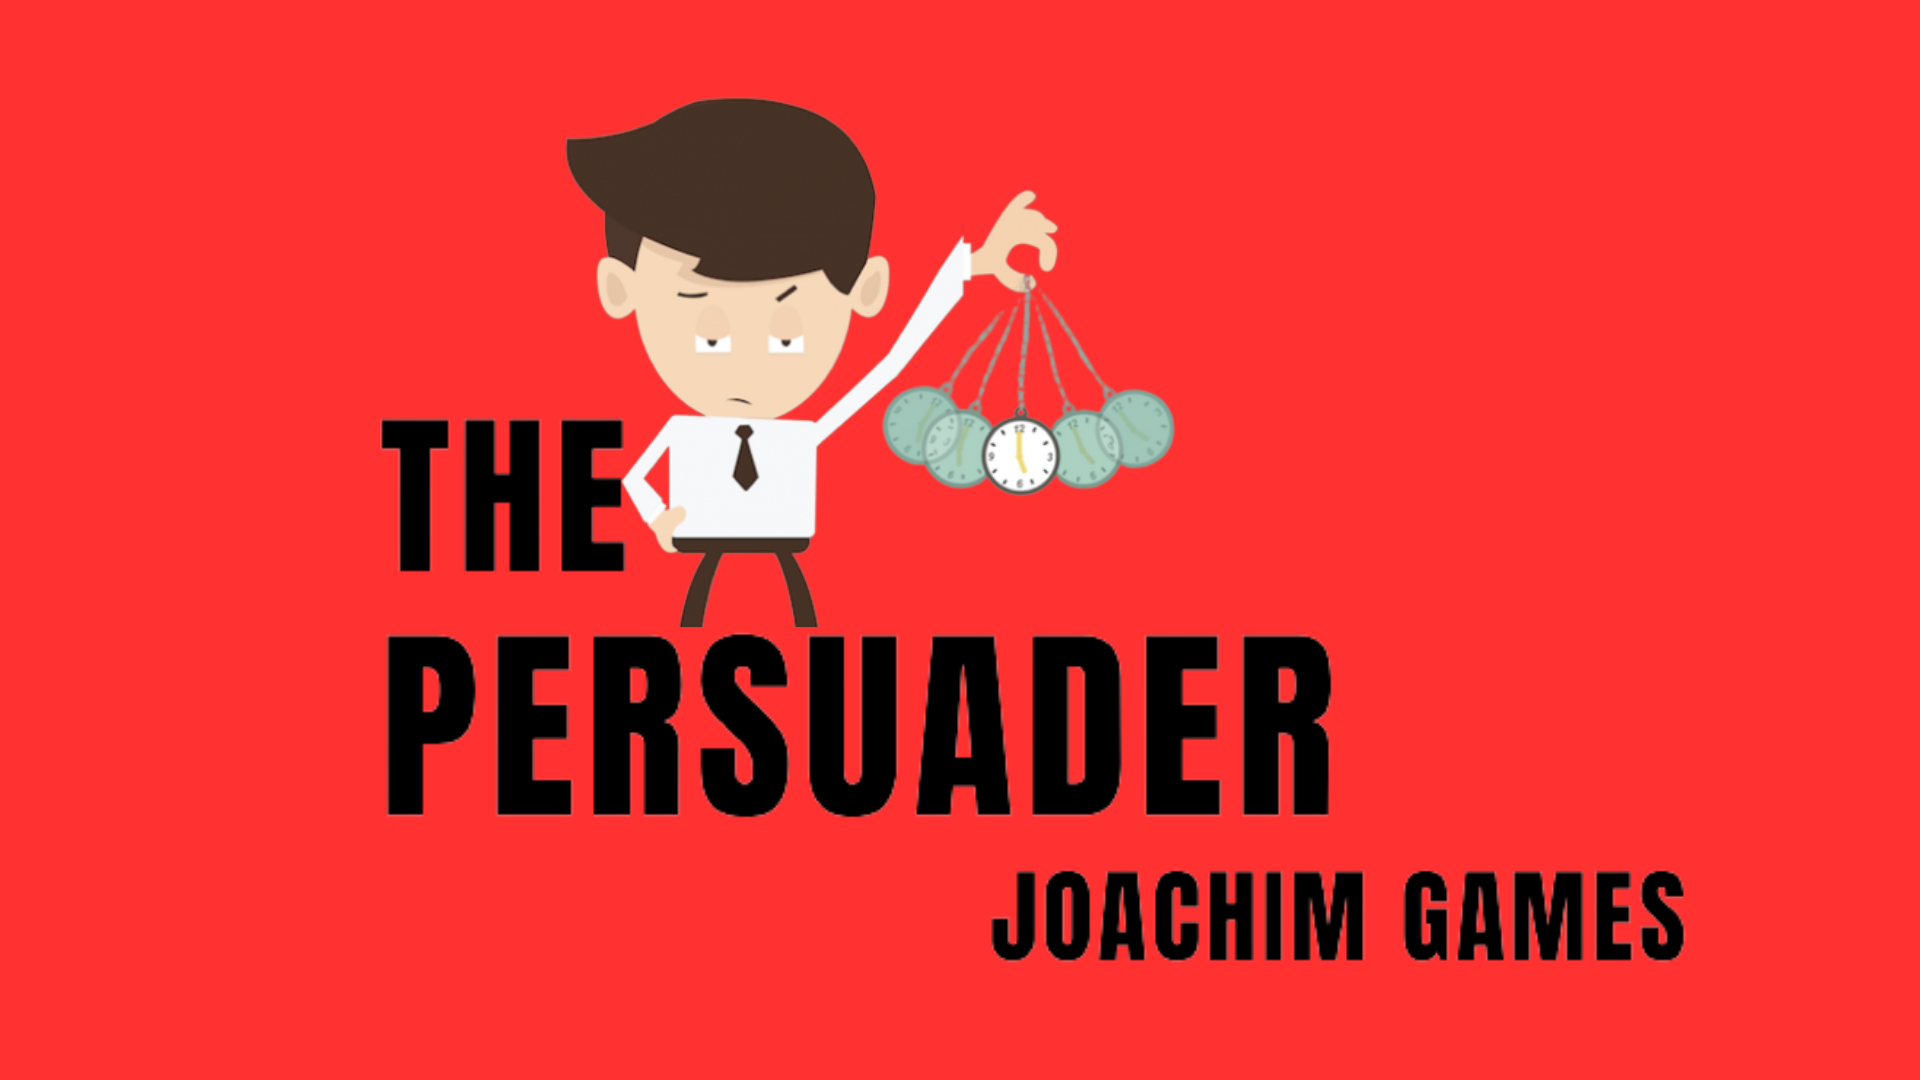 The Persuader